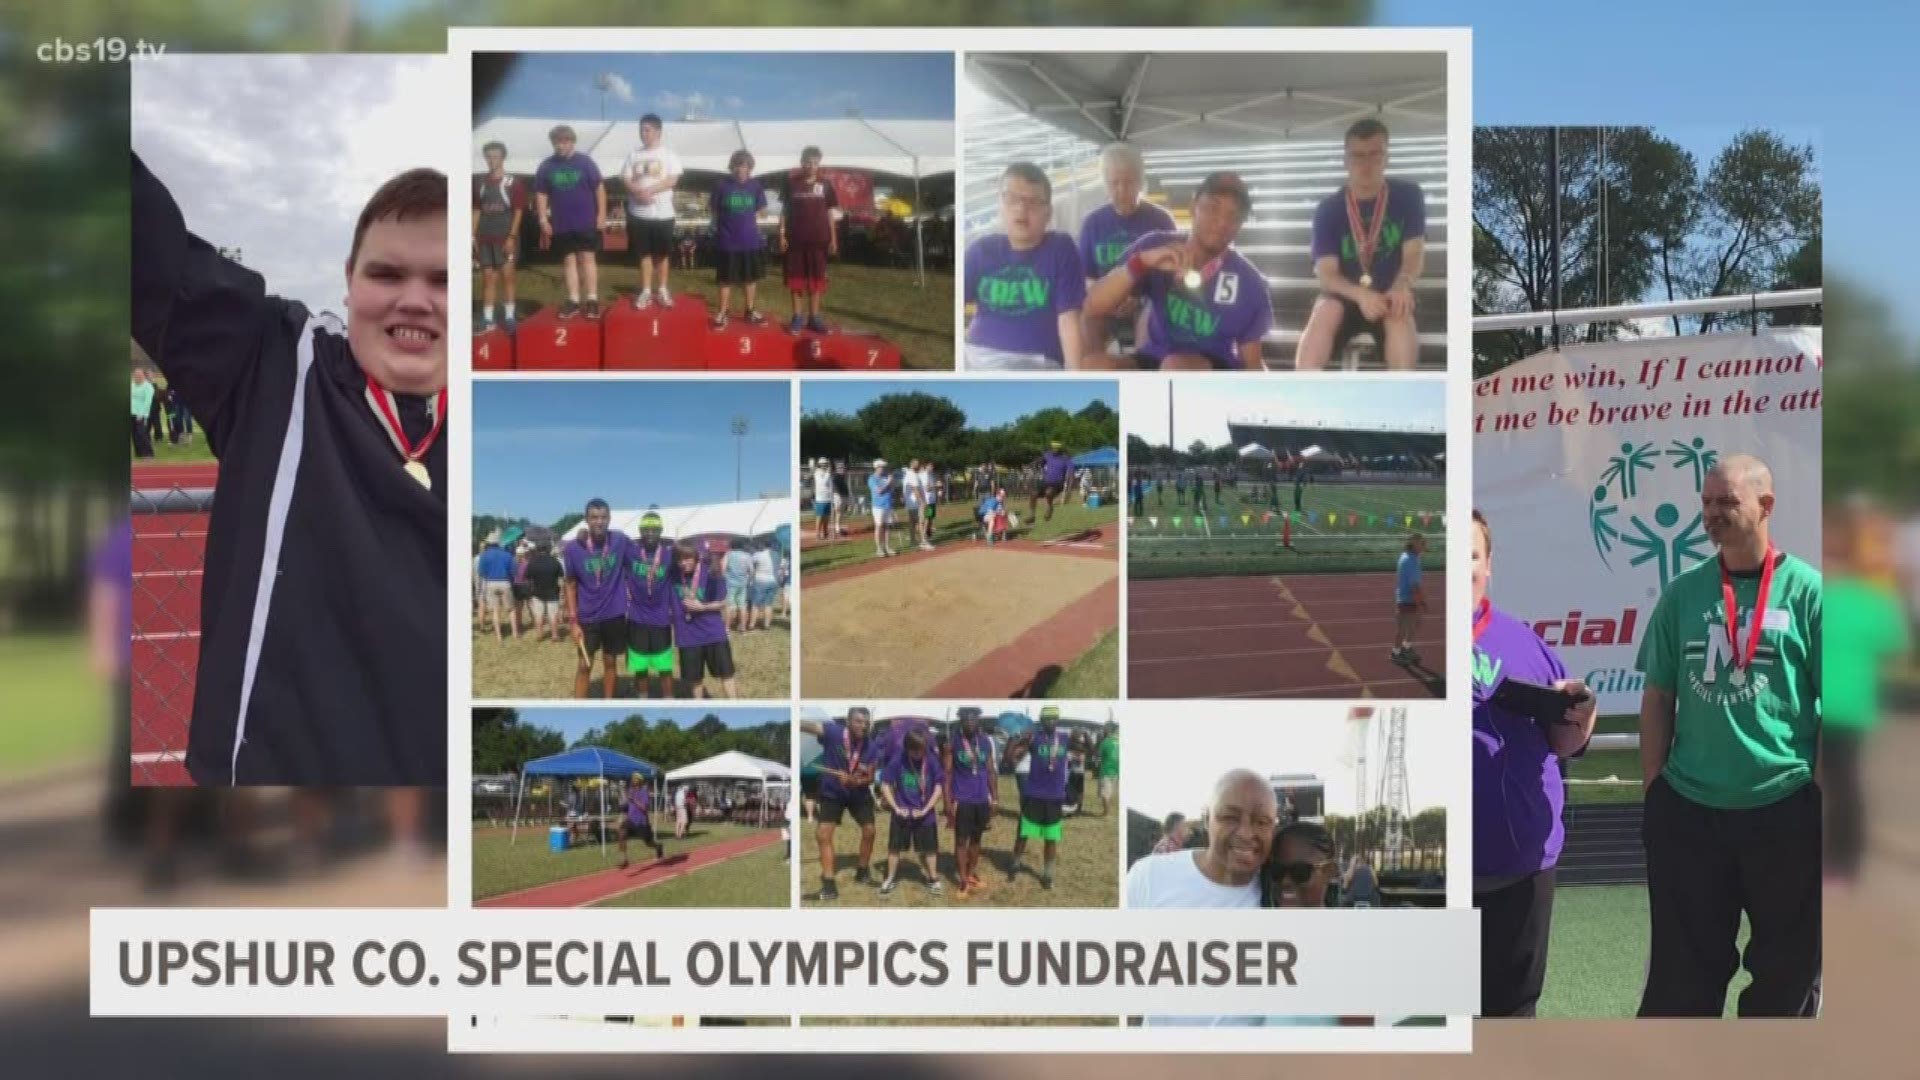 An Upshur County dad is hoping to raise the money needed to send a group of athletes to the 2019 Special Olympics Texas Summer Games.